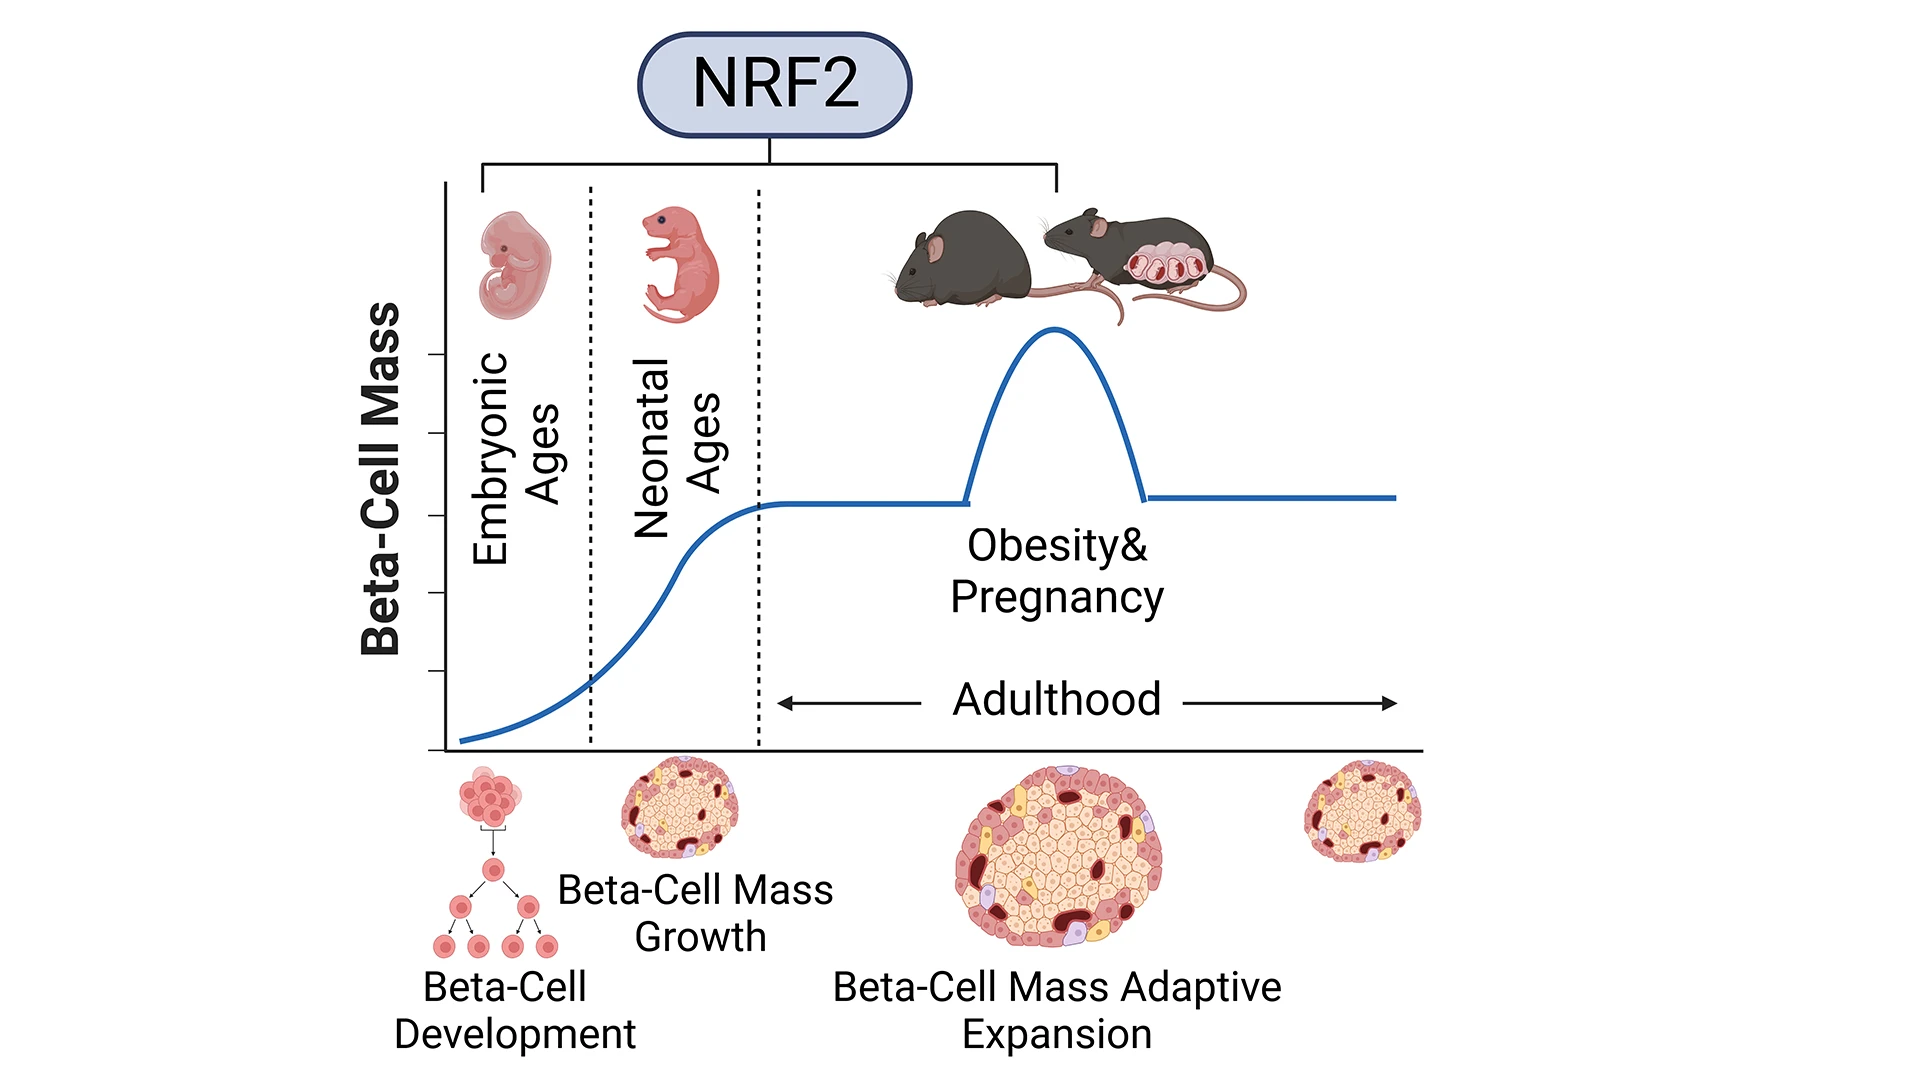 Studying the role of NRF2 in the expansion of beta cell mass during embryonic development, neonatal growth, obesity, and pregnancy.